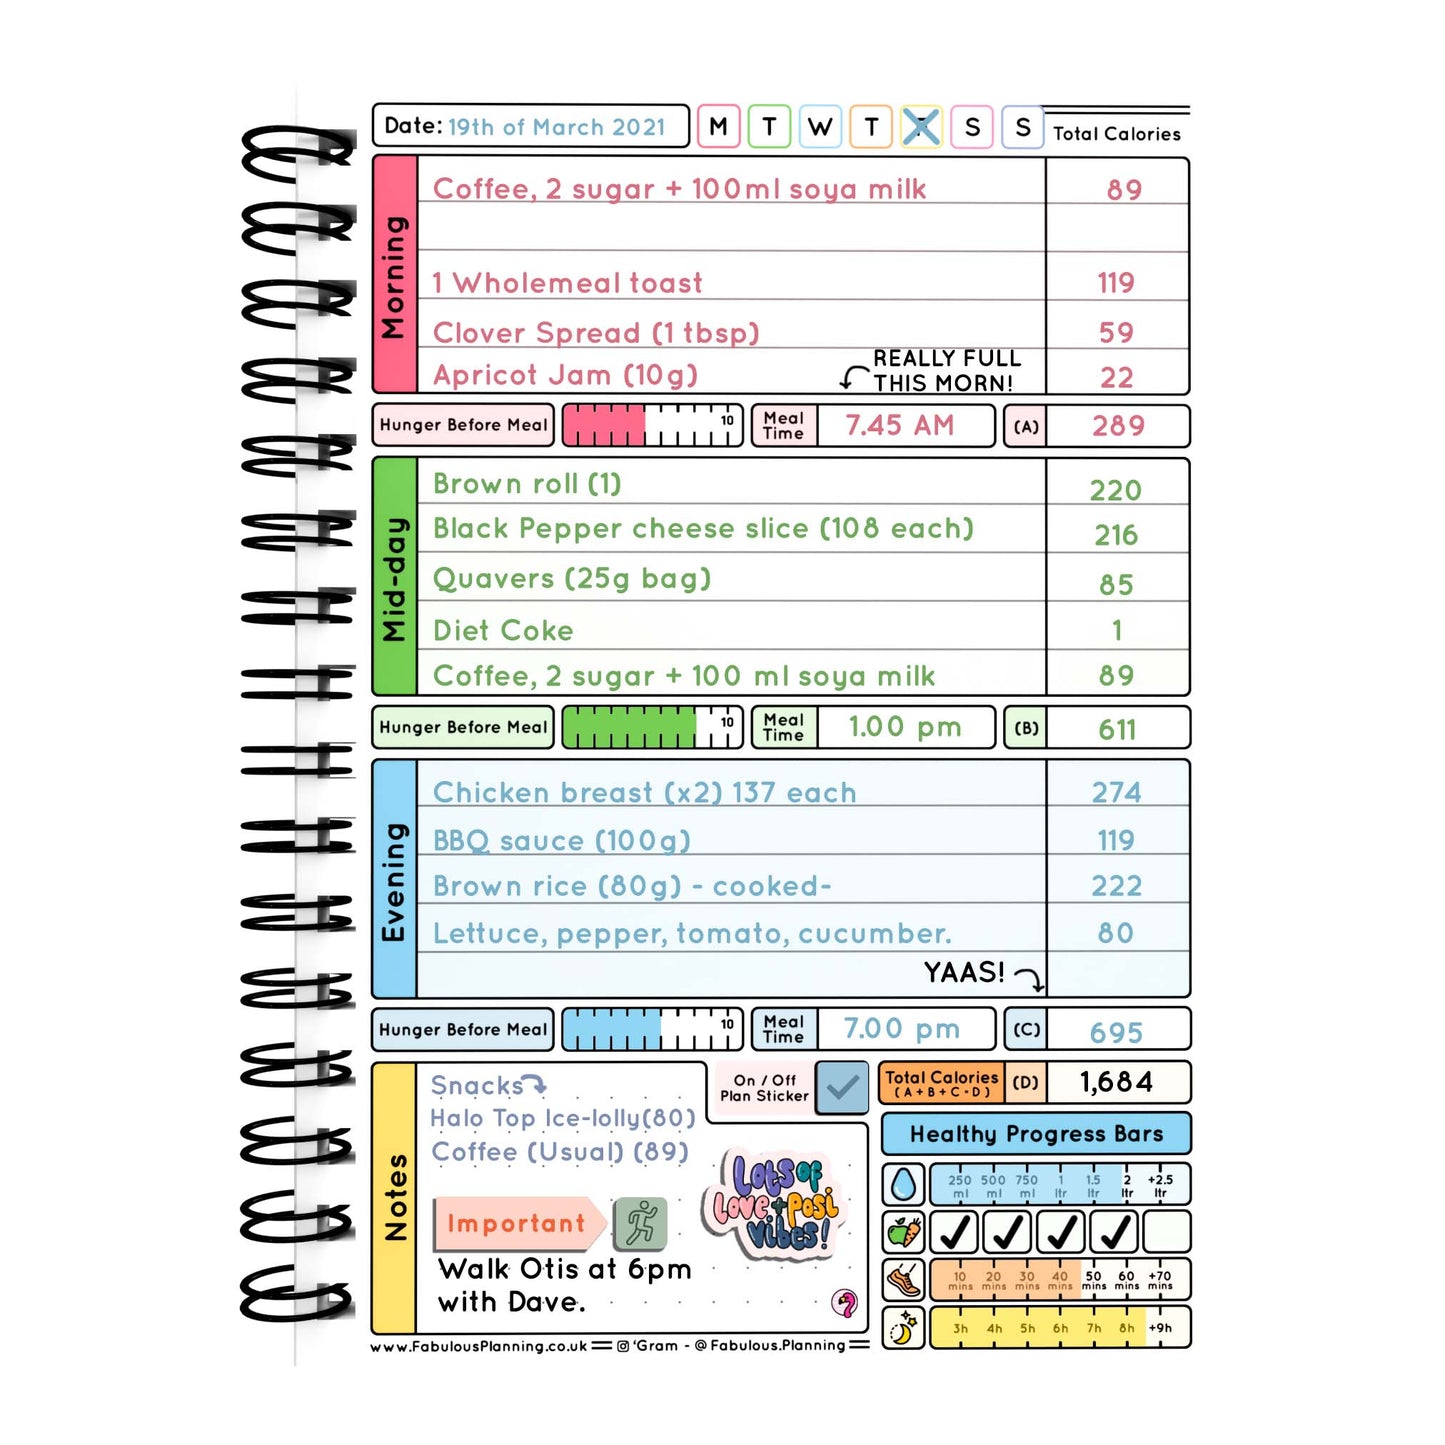 Food Diary - C72 - Calorie Counting